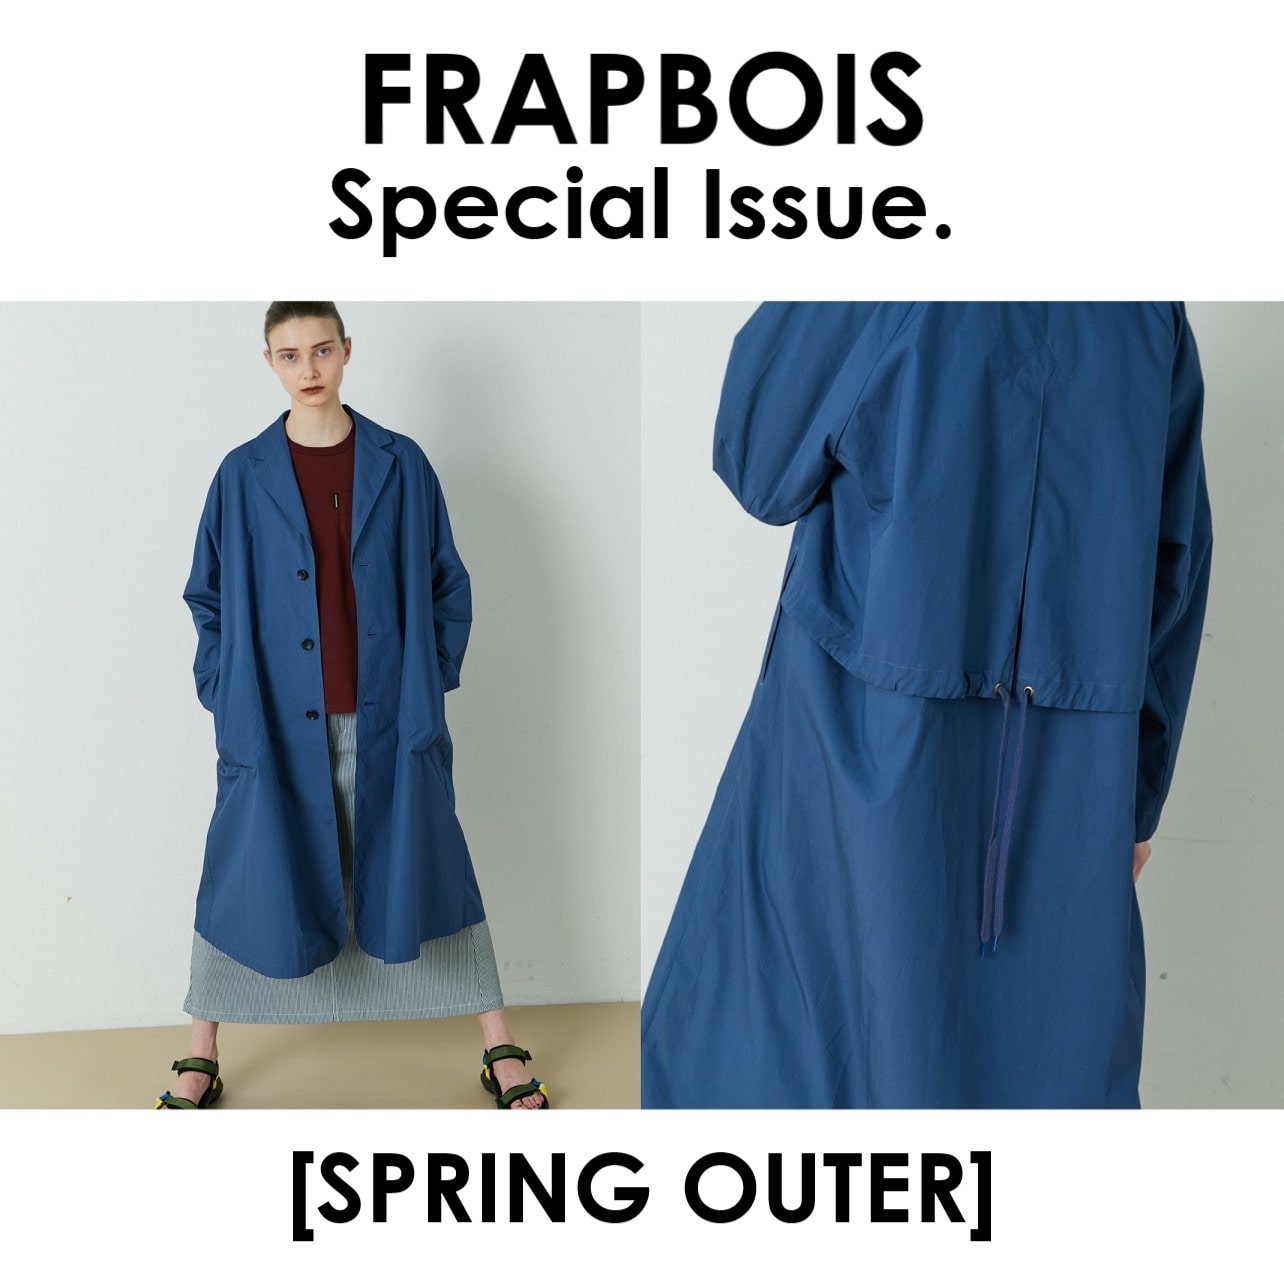 Special Issue.[SPRING OUTER]